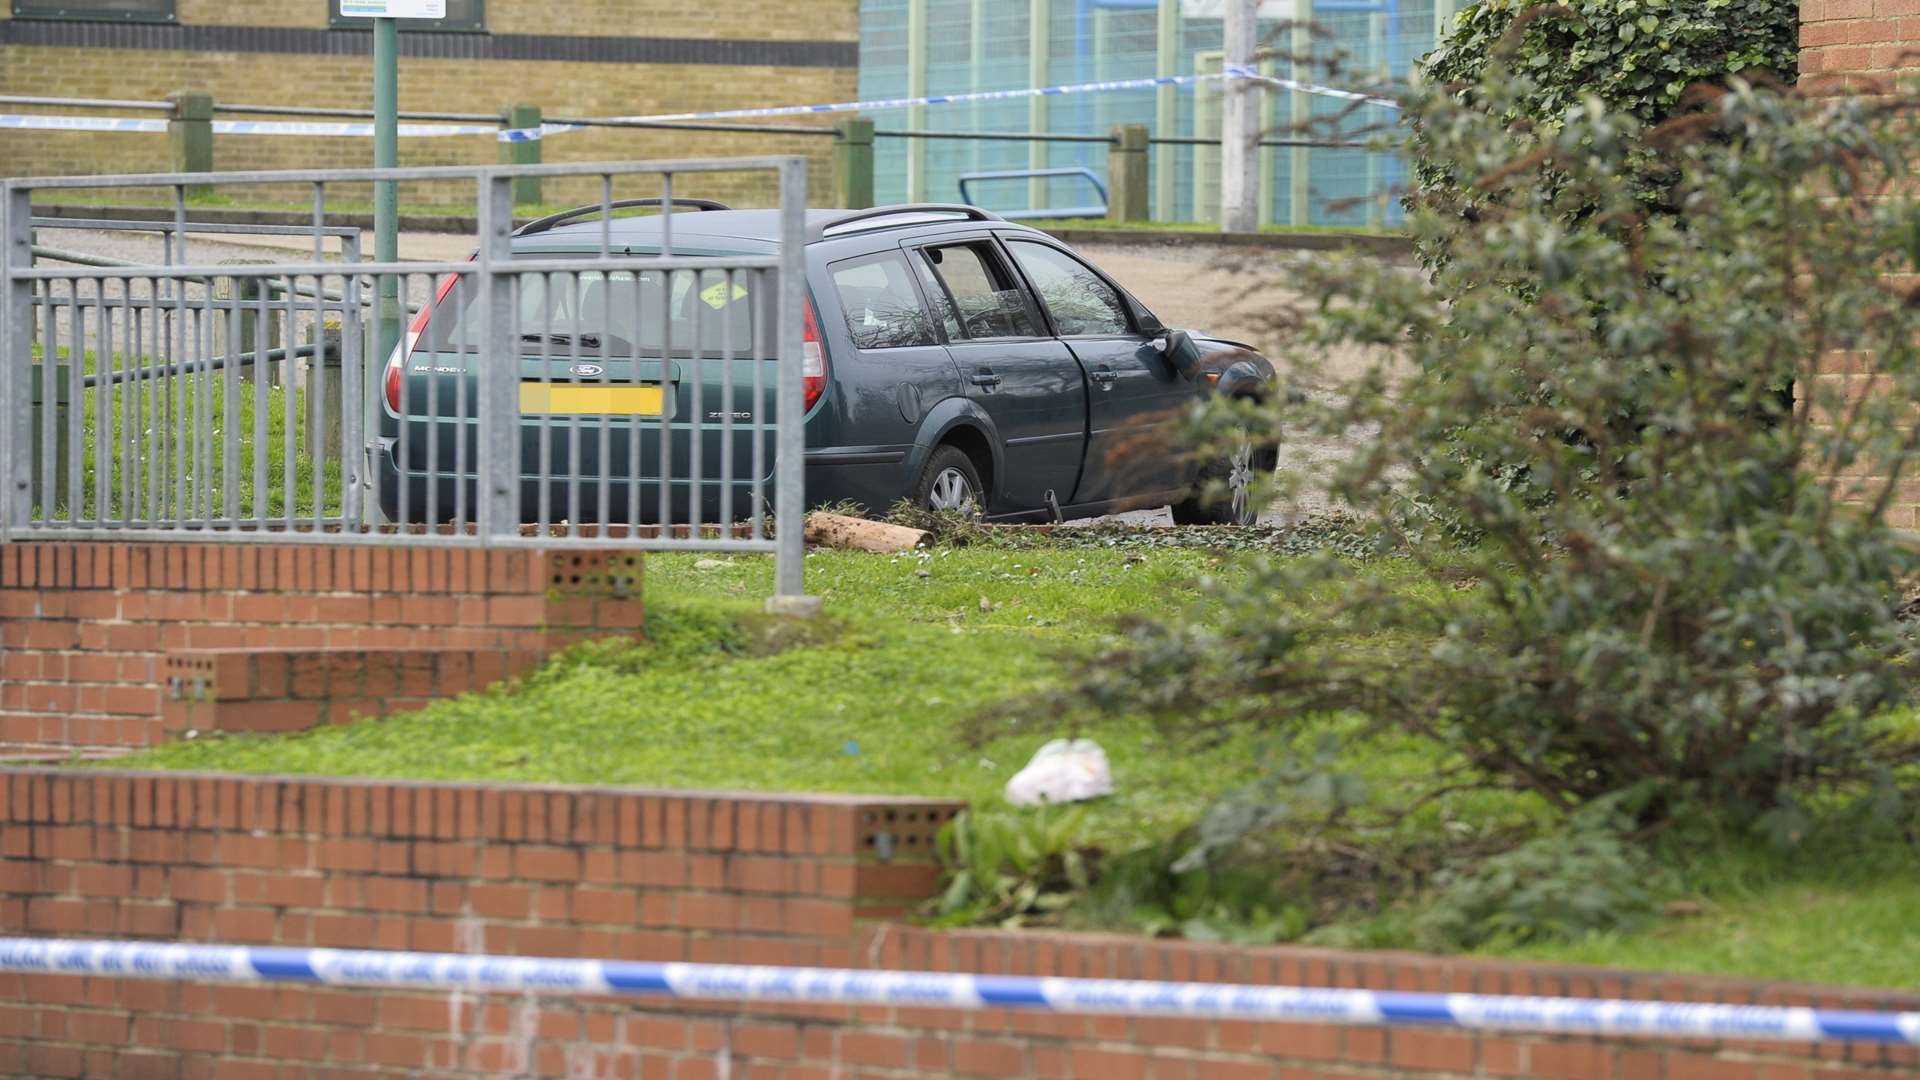 The car mounted a grass verge before hitting a railing. Picture: Andy Payton